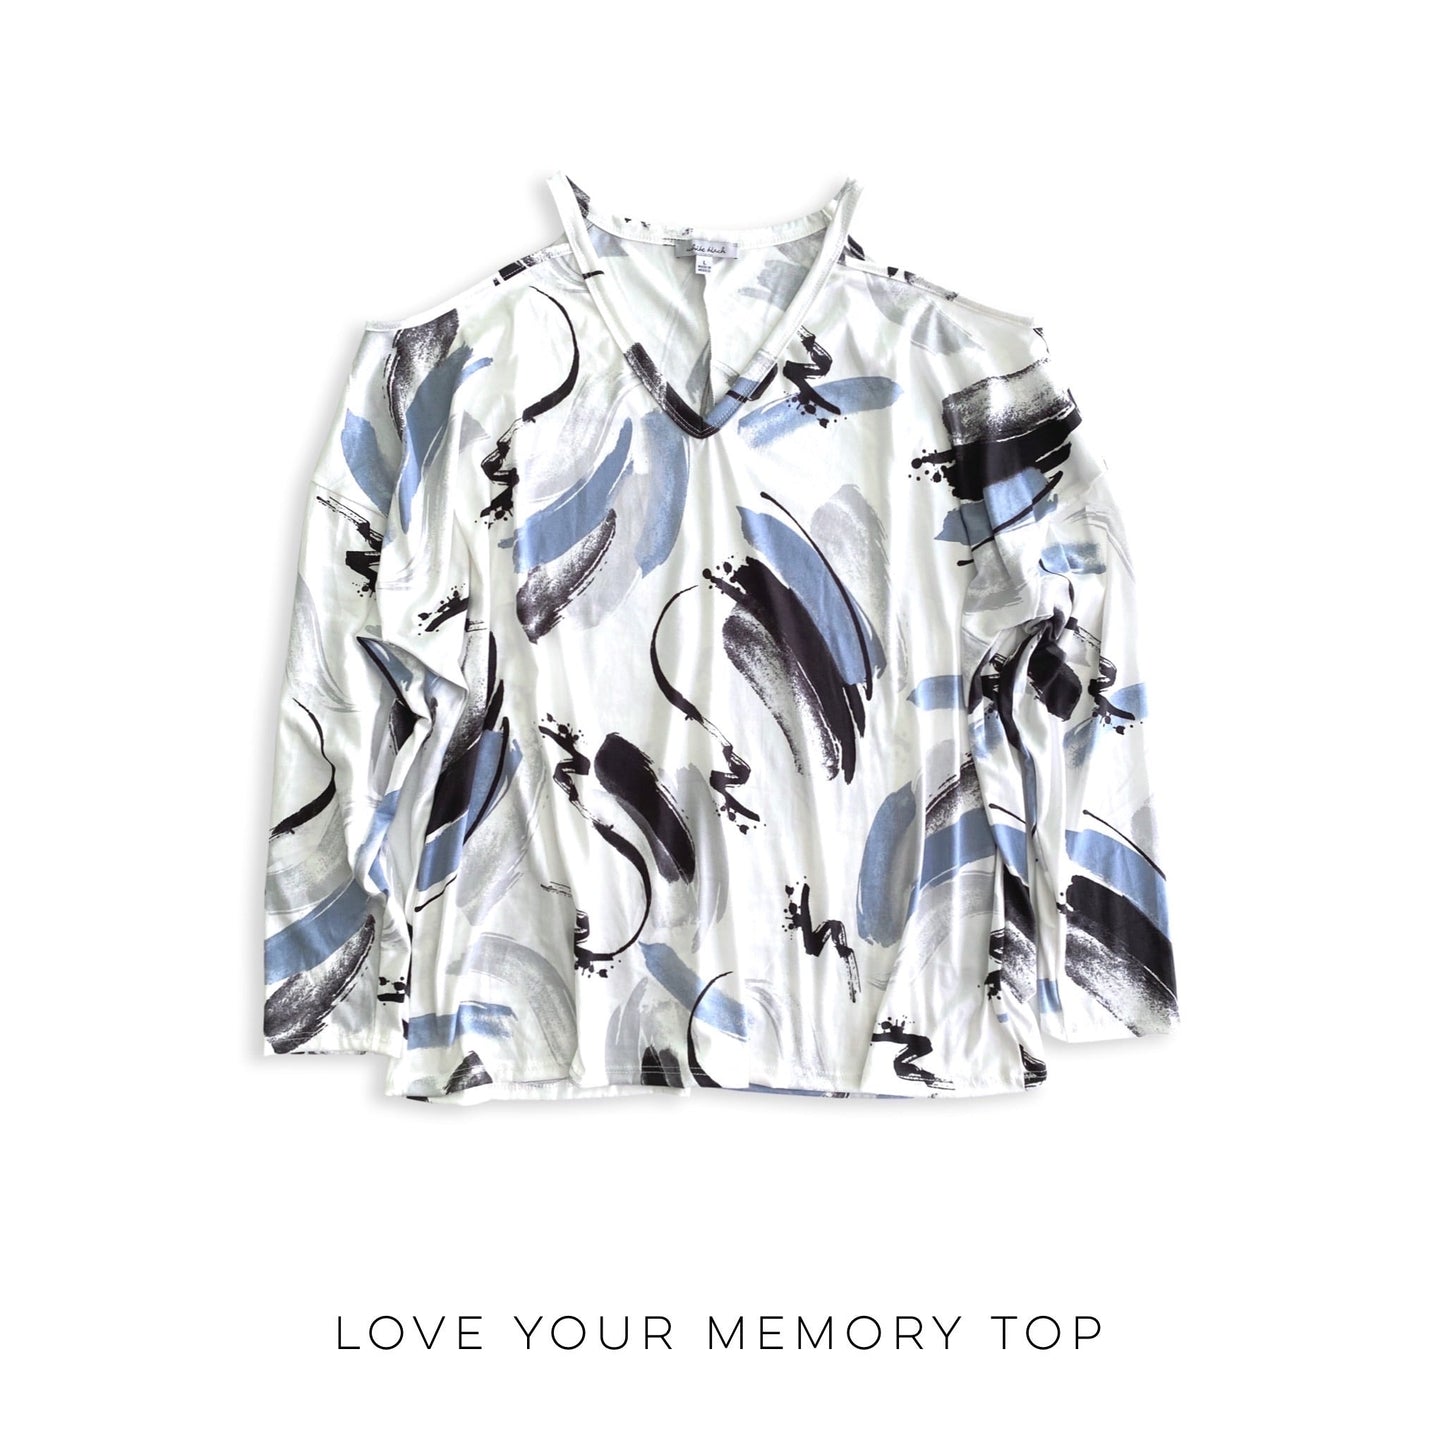 Love Your Memory Top